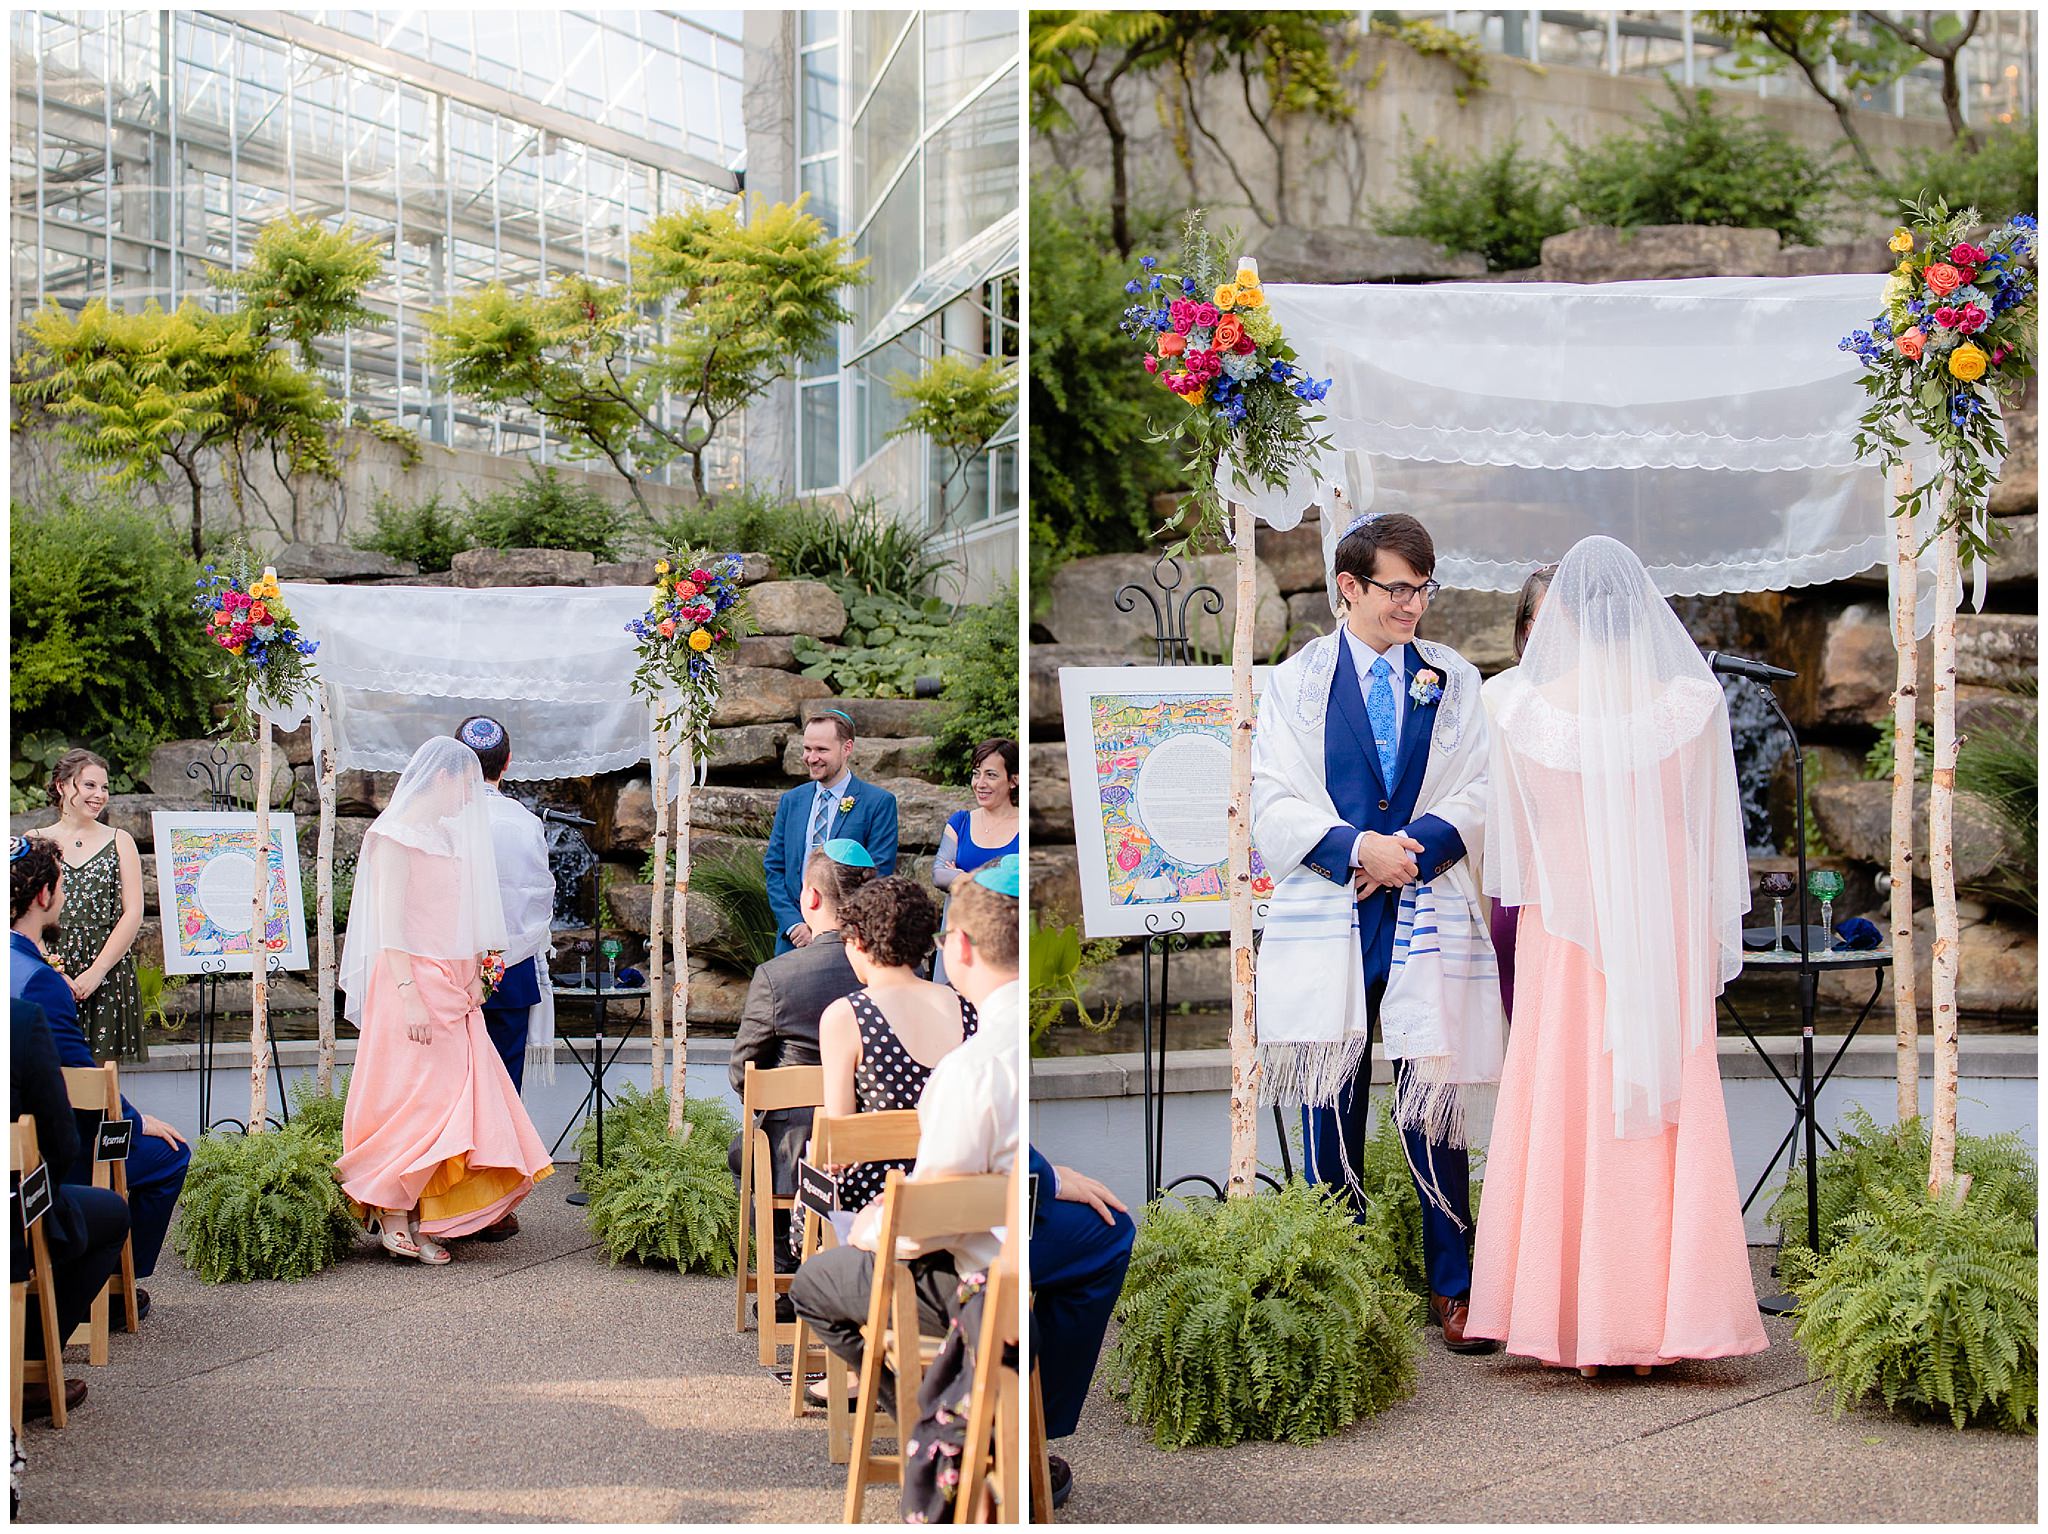 Bride & groom circle each other under the chuppah at a Jewish wedding ceremony at Phipps Conservatory